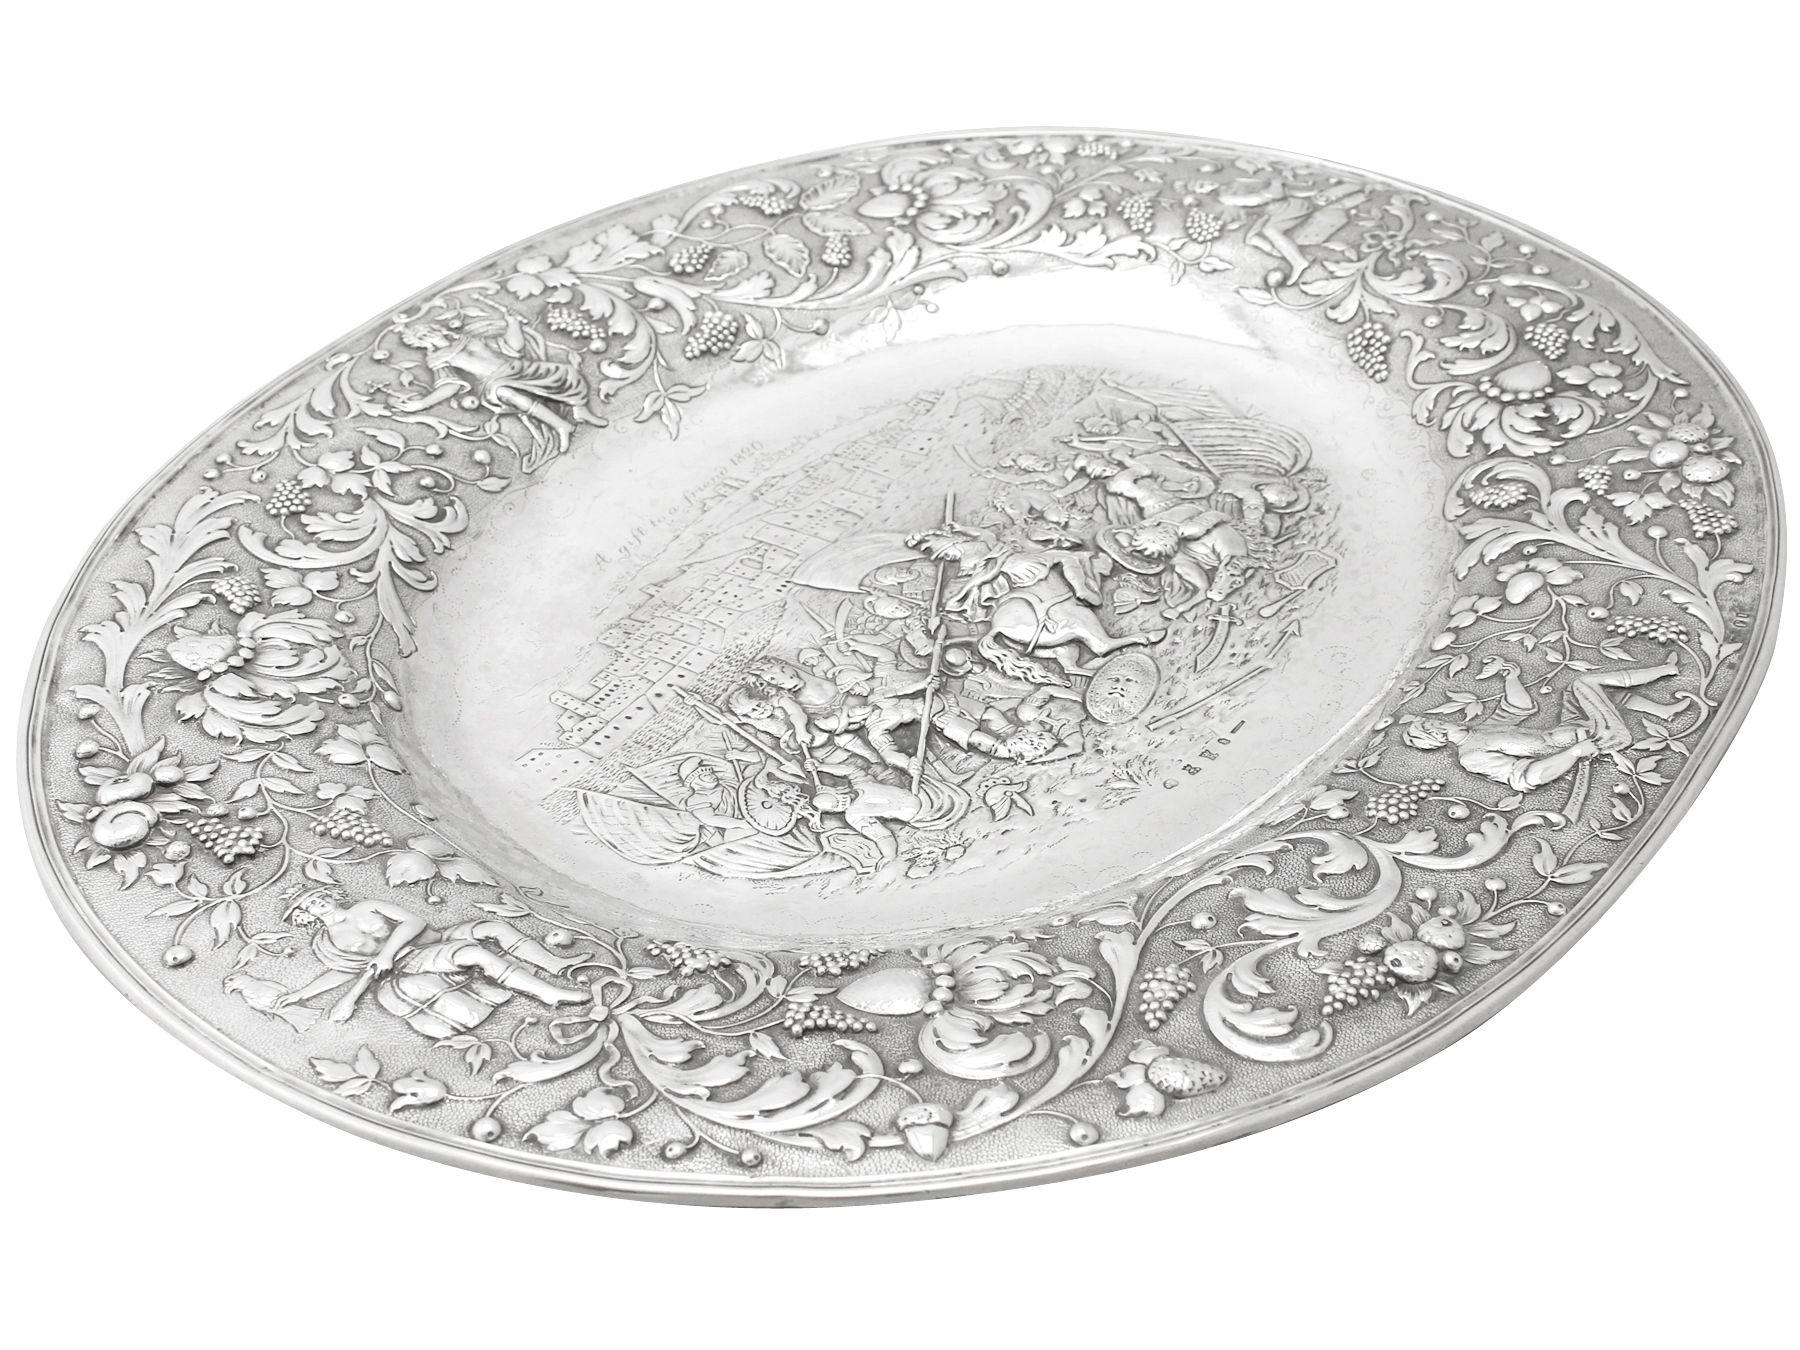 Antique German Sterling Silver Charger Plate In Excellent Condition For Sale In Jesmond, Newcastle Upon Tyne